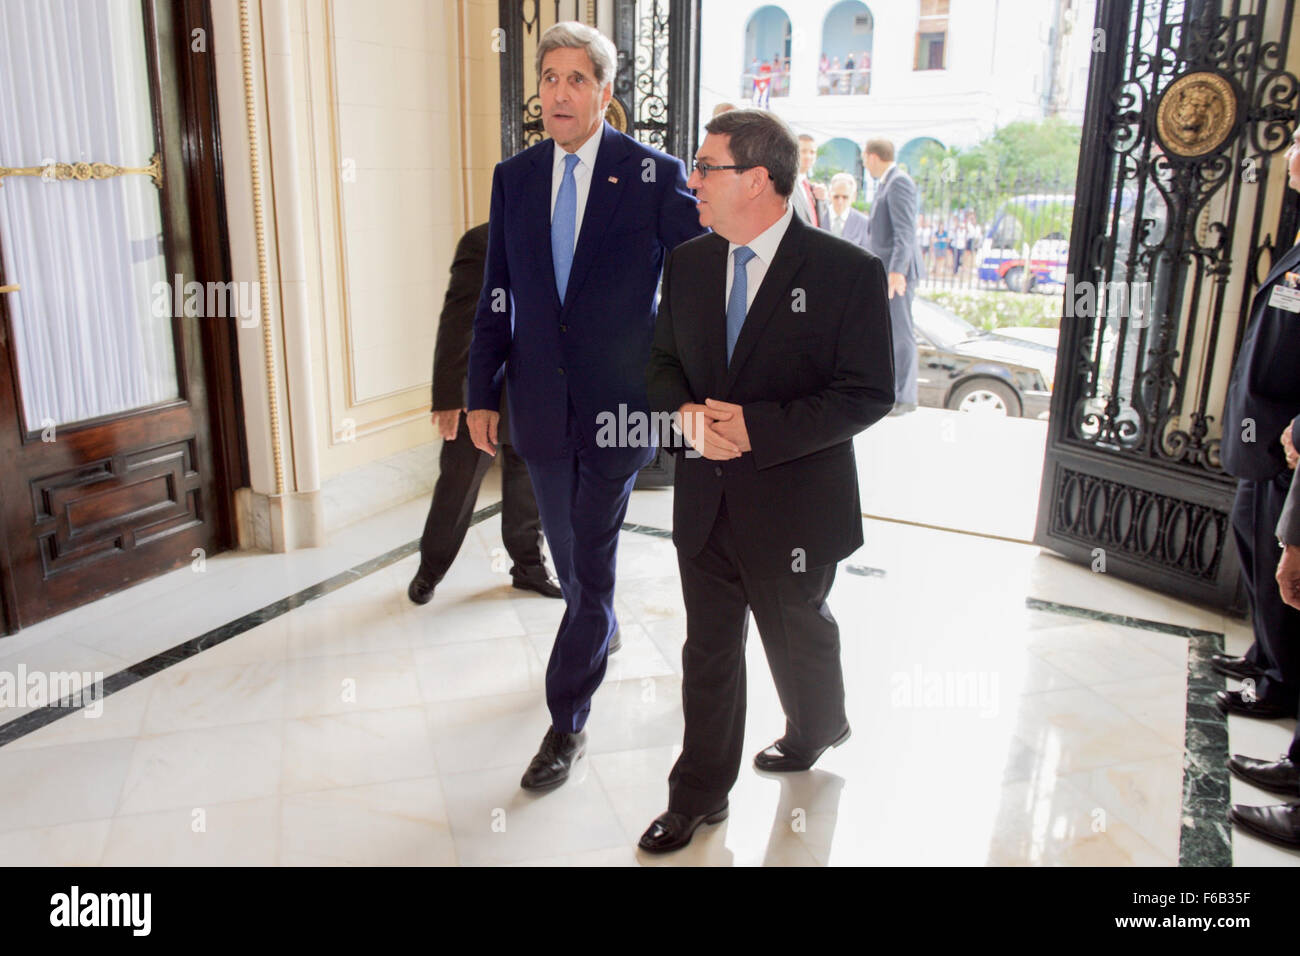 Secretary Kerry and Cuban Foreign Minister Rodriguez Enter the Cuban Ministry of Foreign Affairs Stock Photo